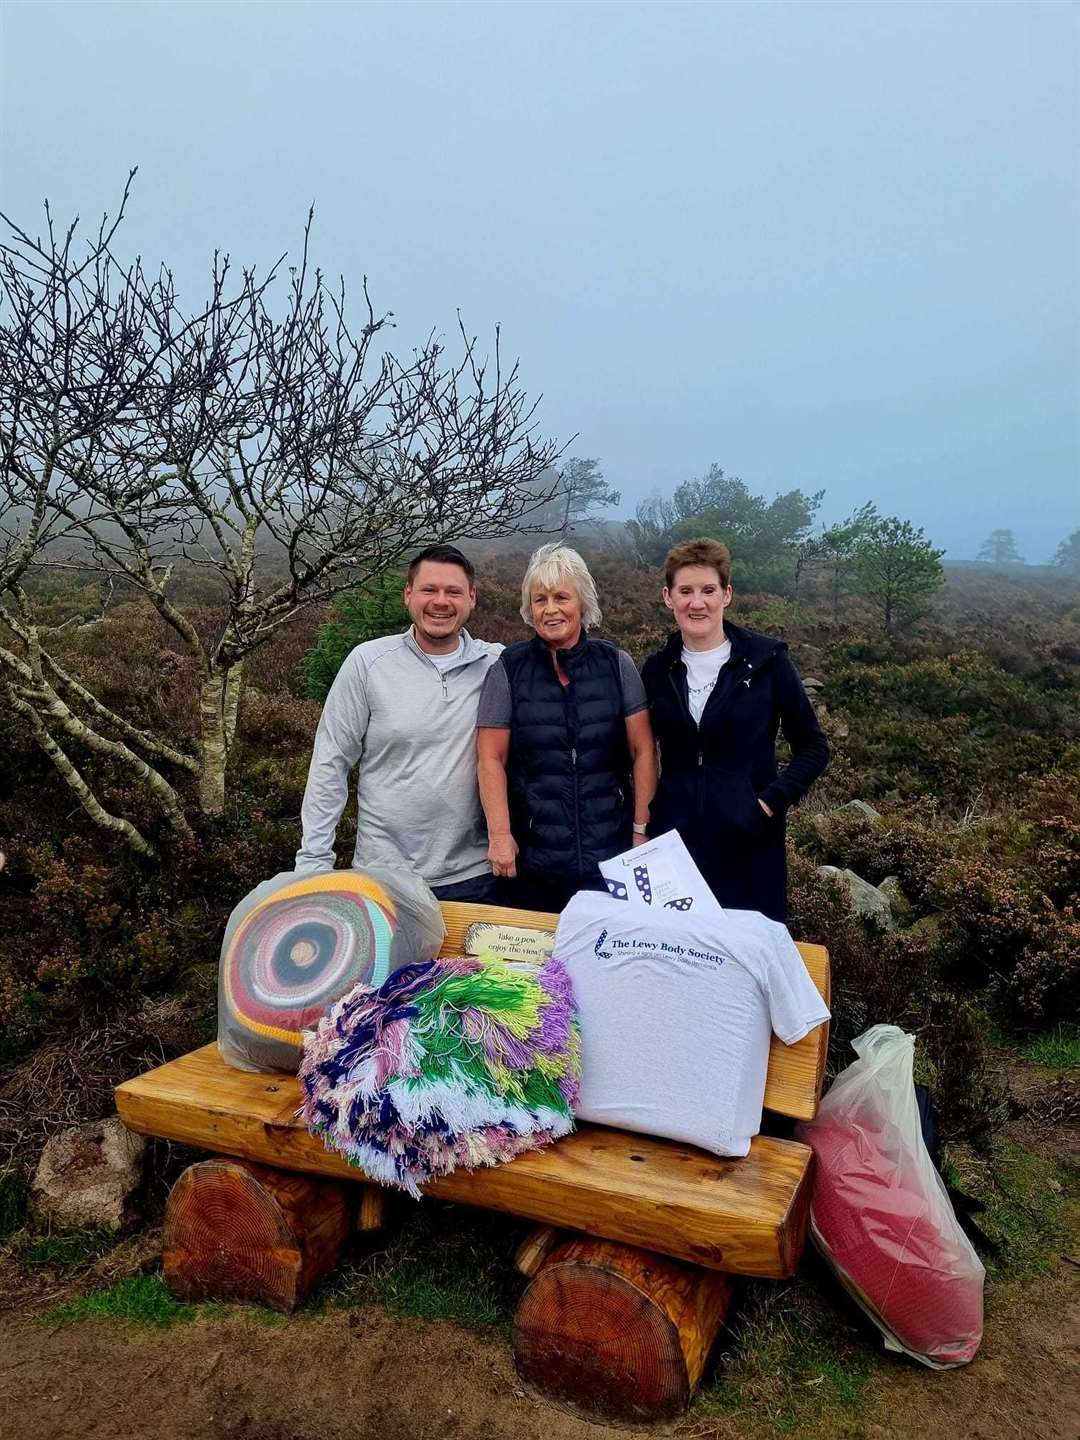 Matthew Sunter, Lorraine Grant and Jenny Rae take a break at the bench which they themselves carried up the hillside last year.